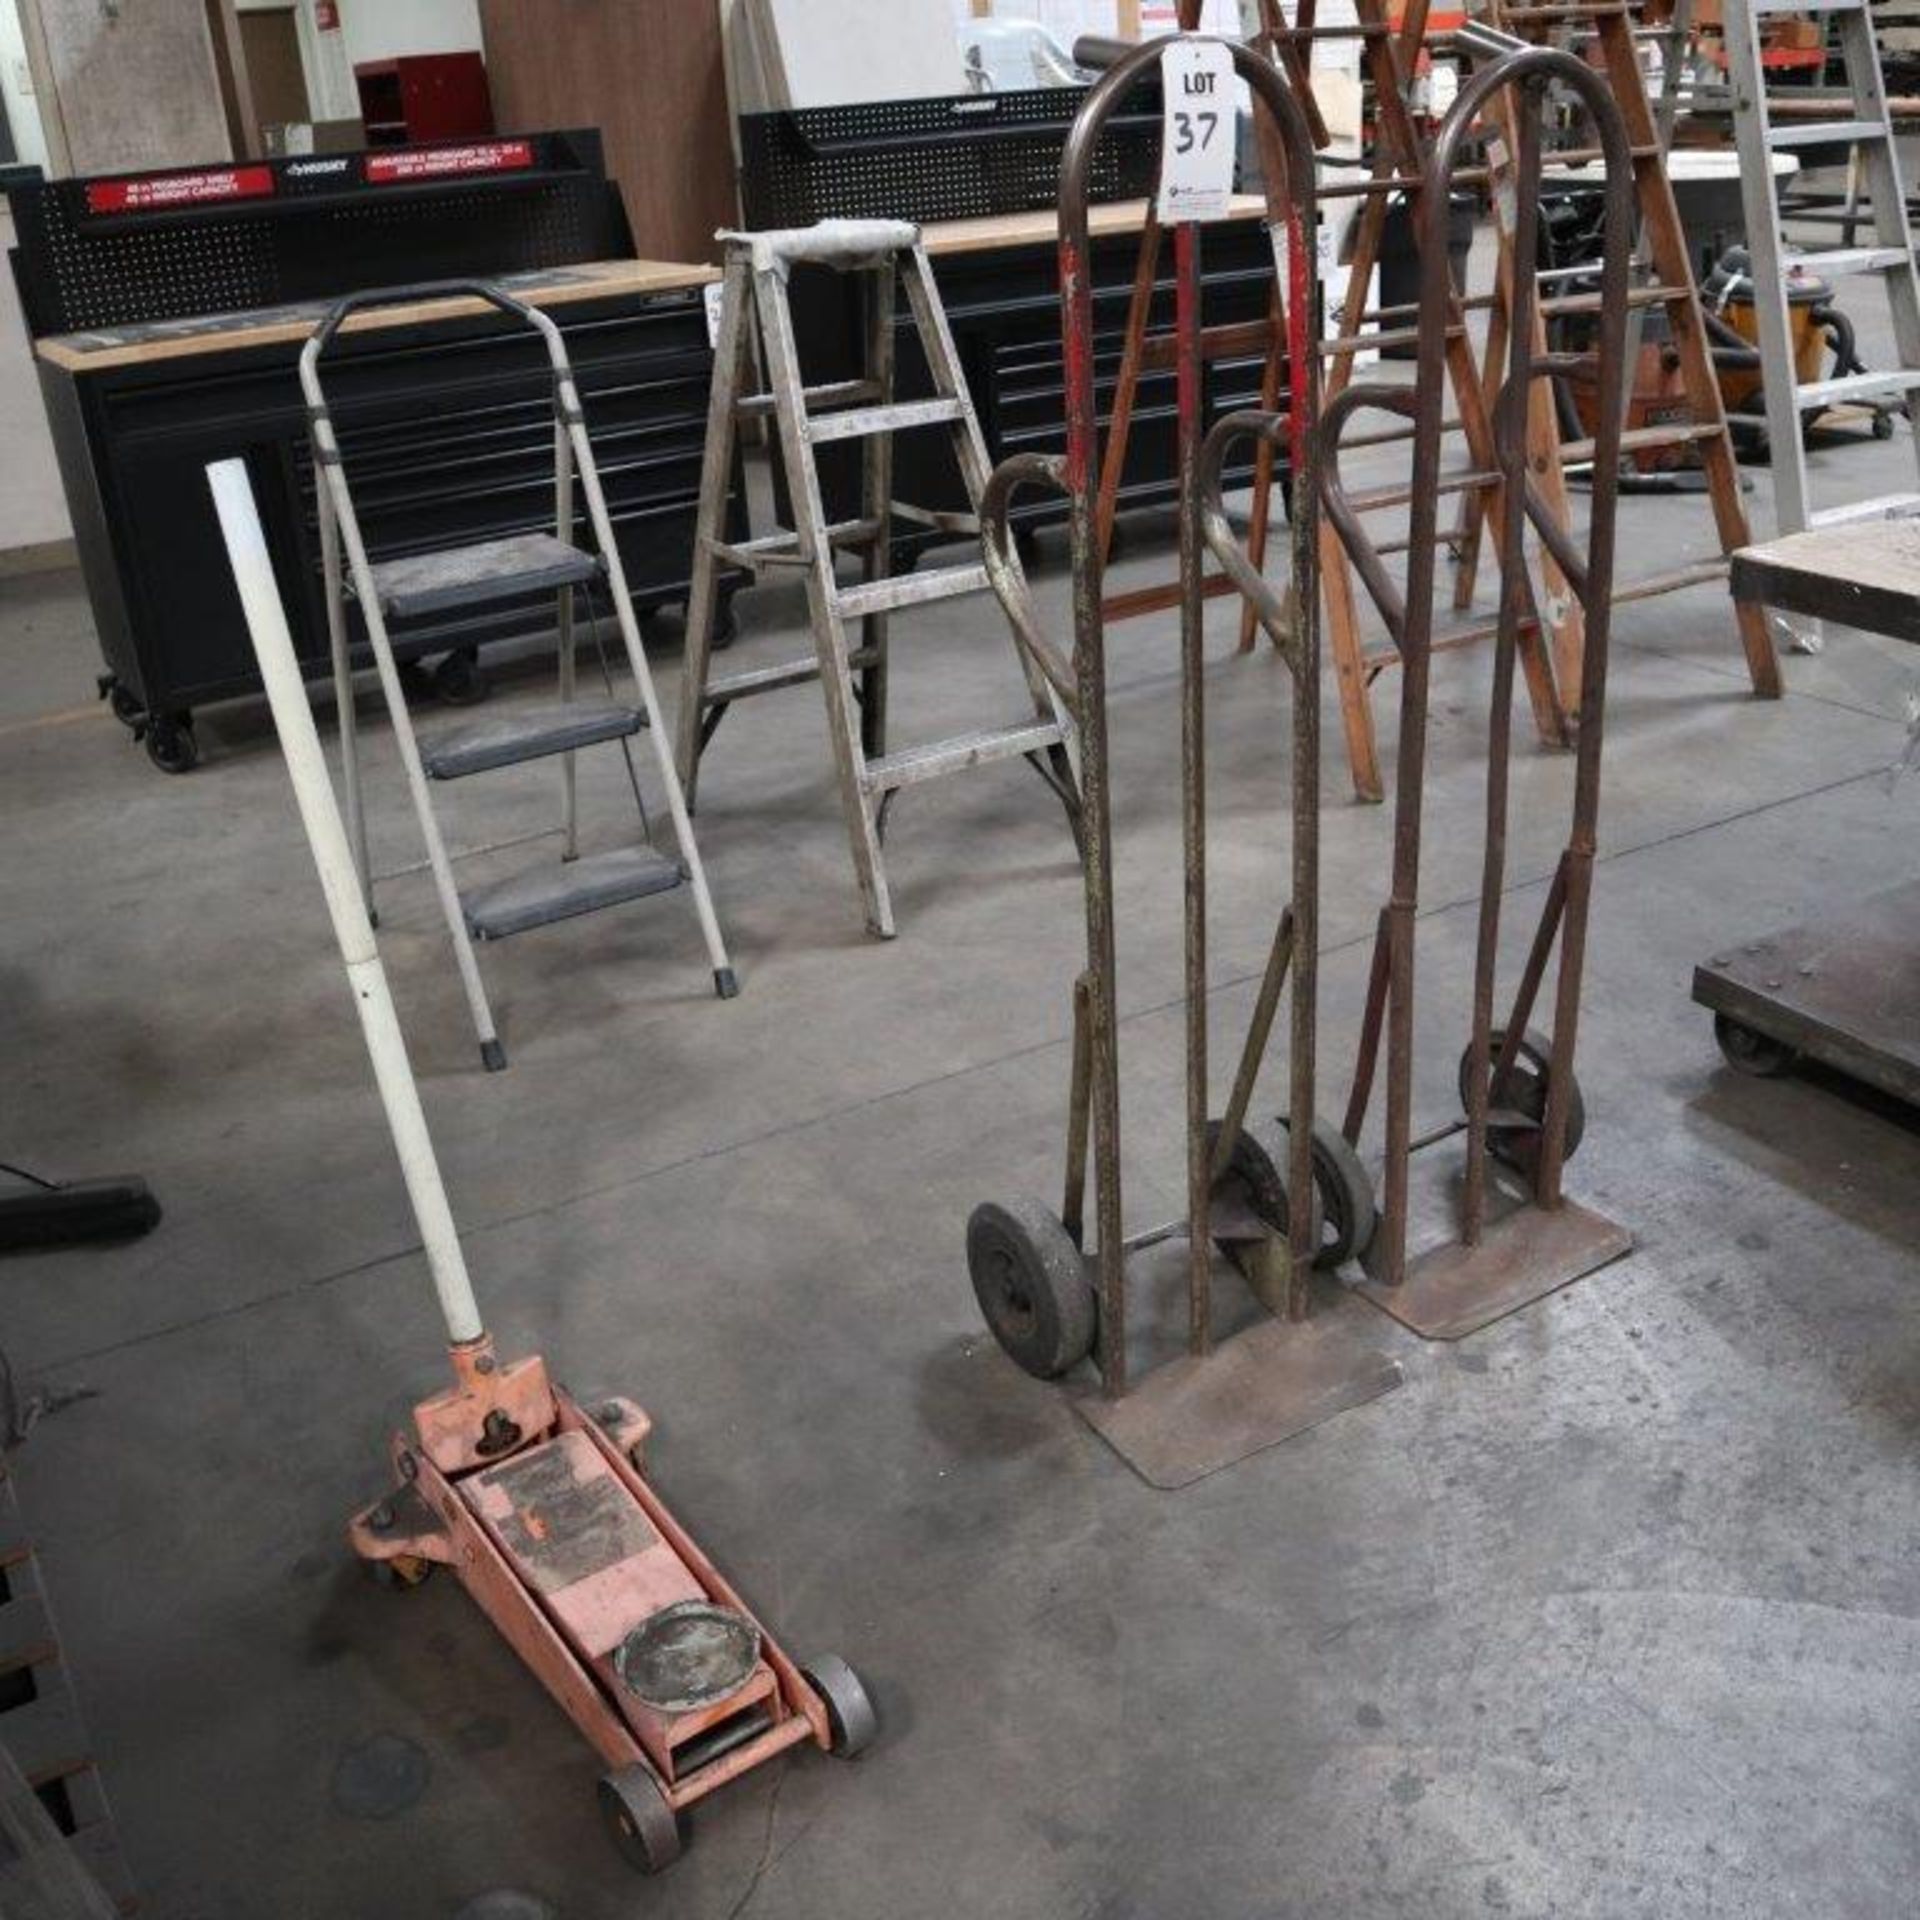 LOT TO INCLUDE: (2) HAND TRUCKS, (1) CAR JACK